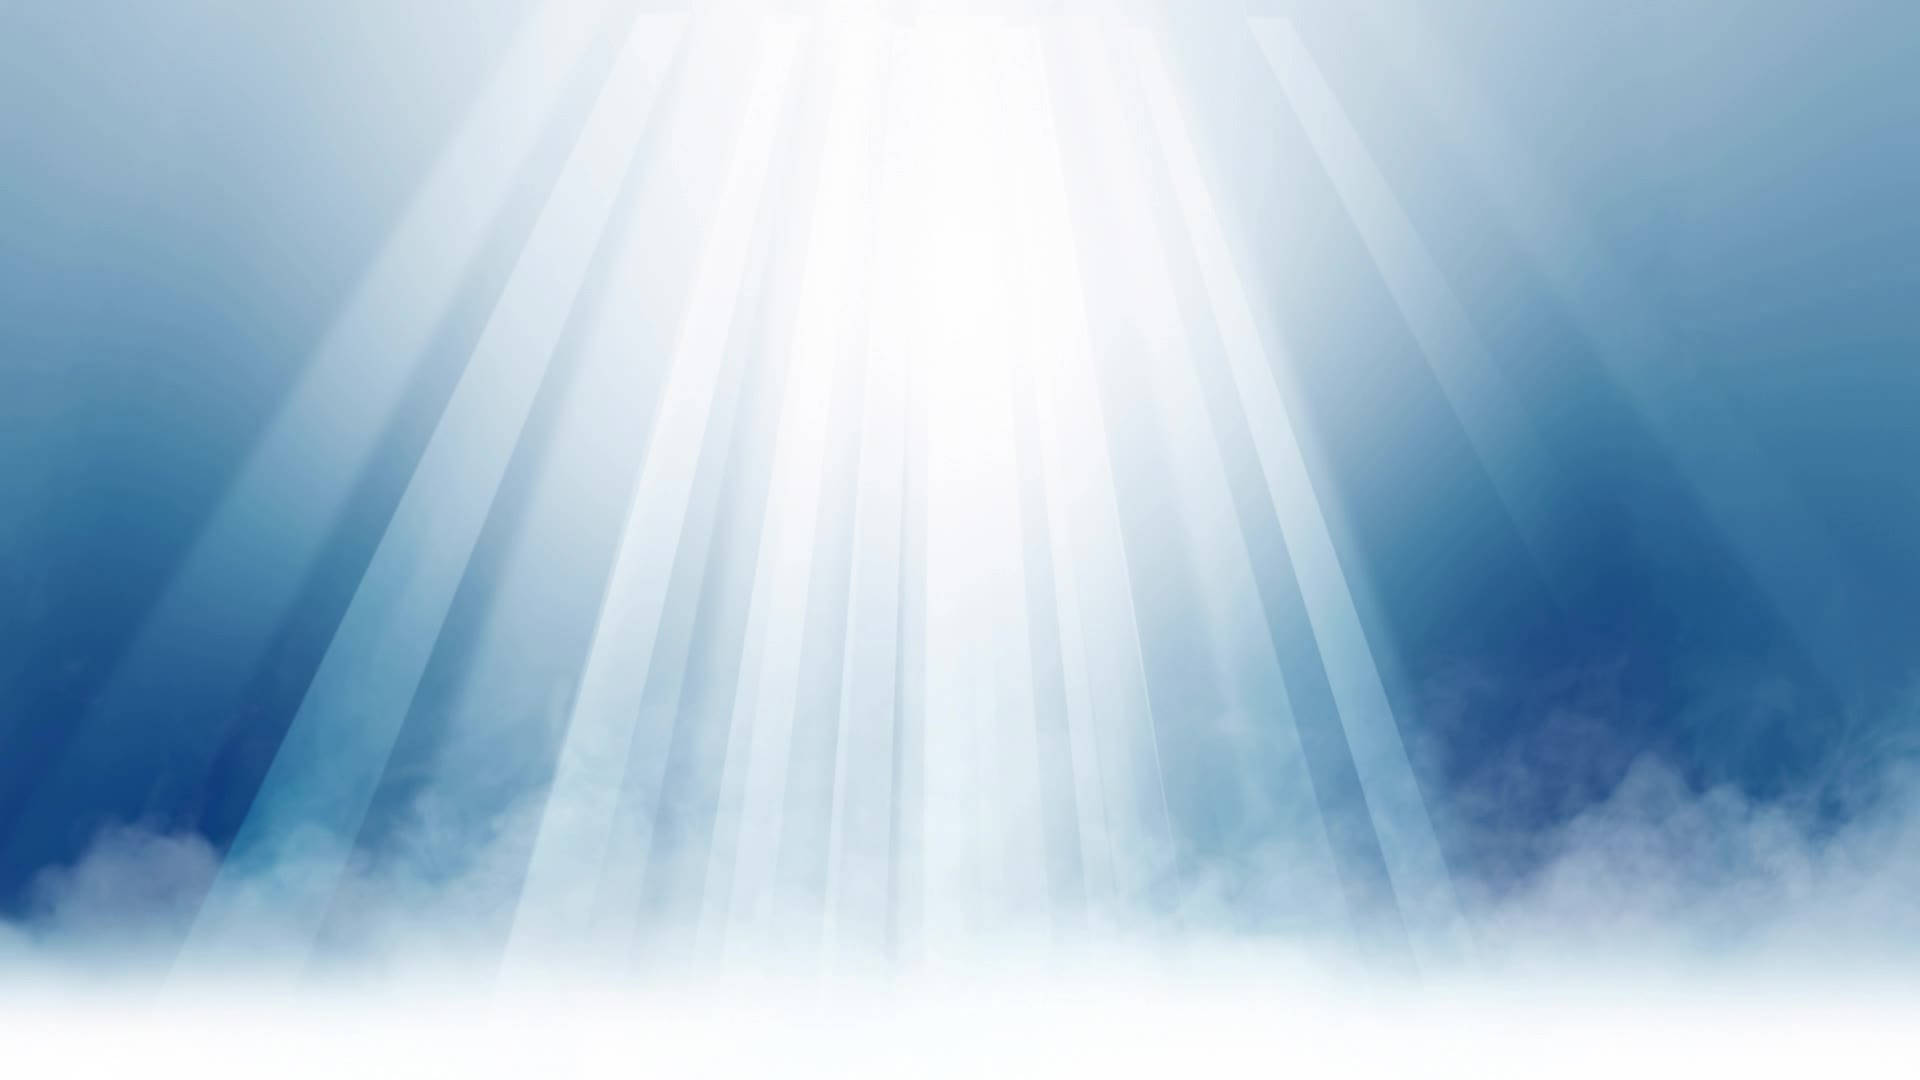 Shining Funeral Clouds Background